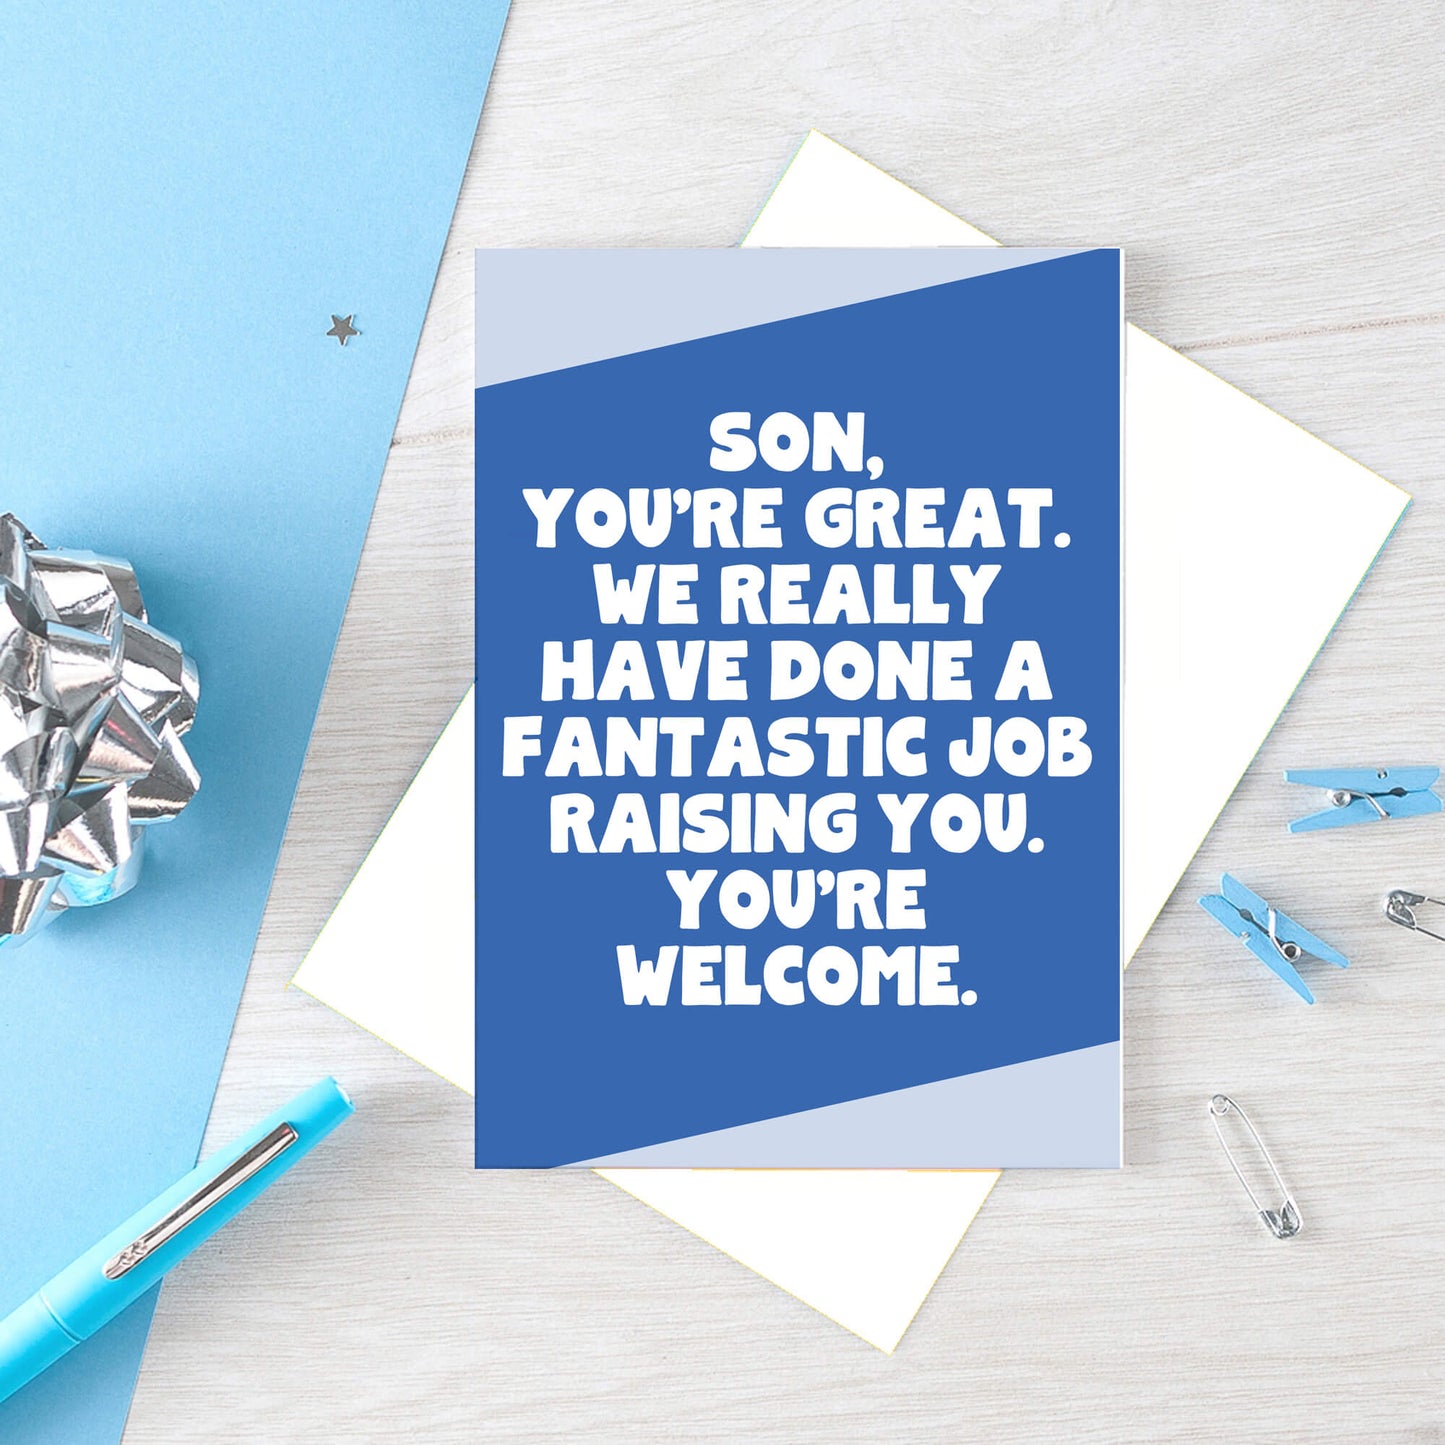 Big Card For Son by SixElevenCreations. Reads Son, you're great. We really have done a fantastic job raising you. You're welcome. Product Code SE3076A5